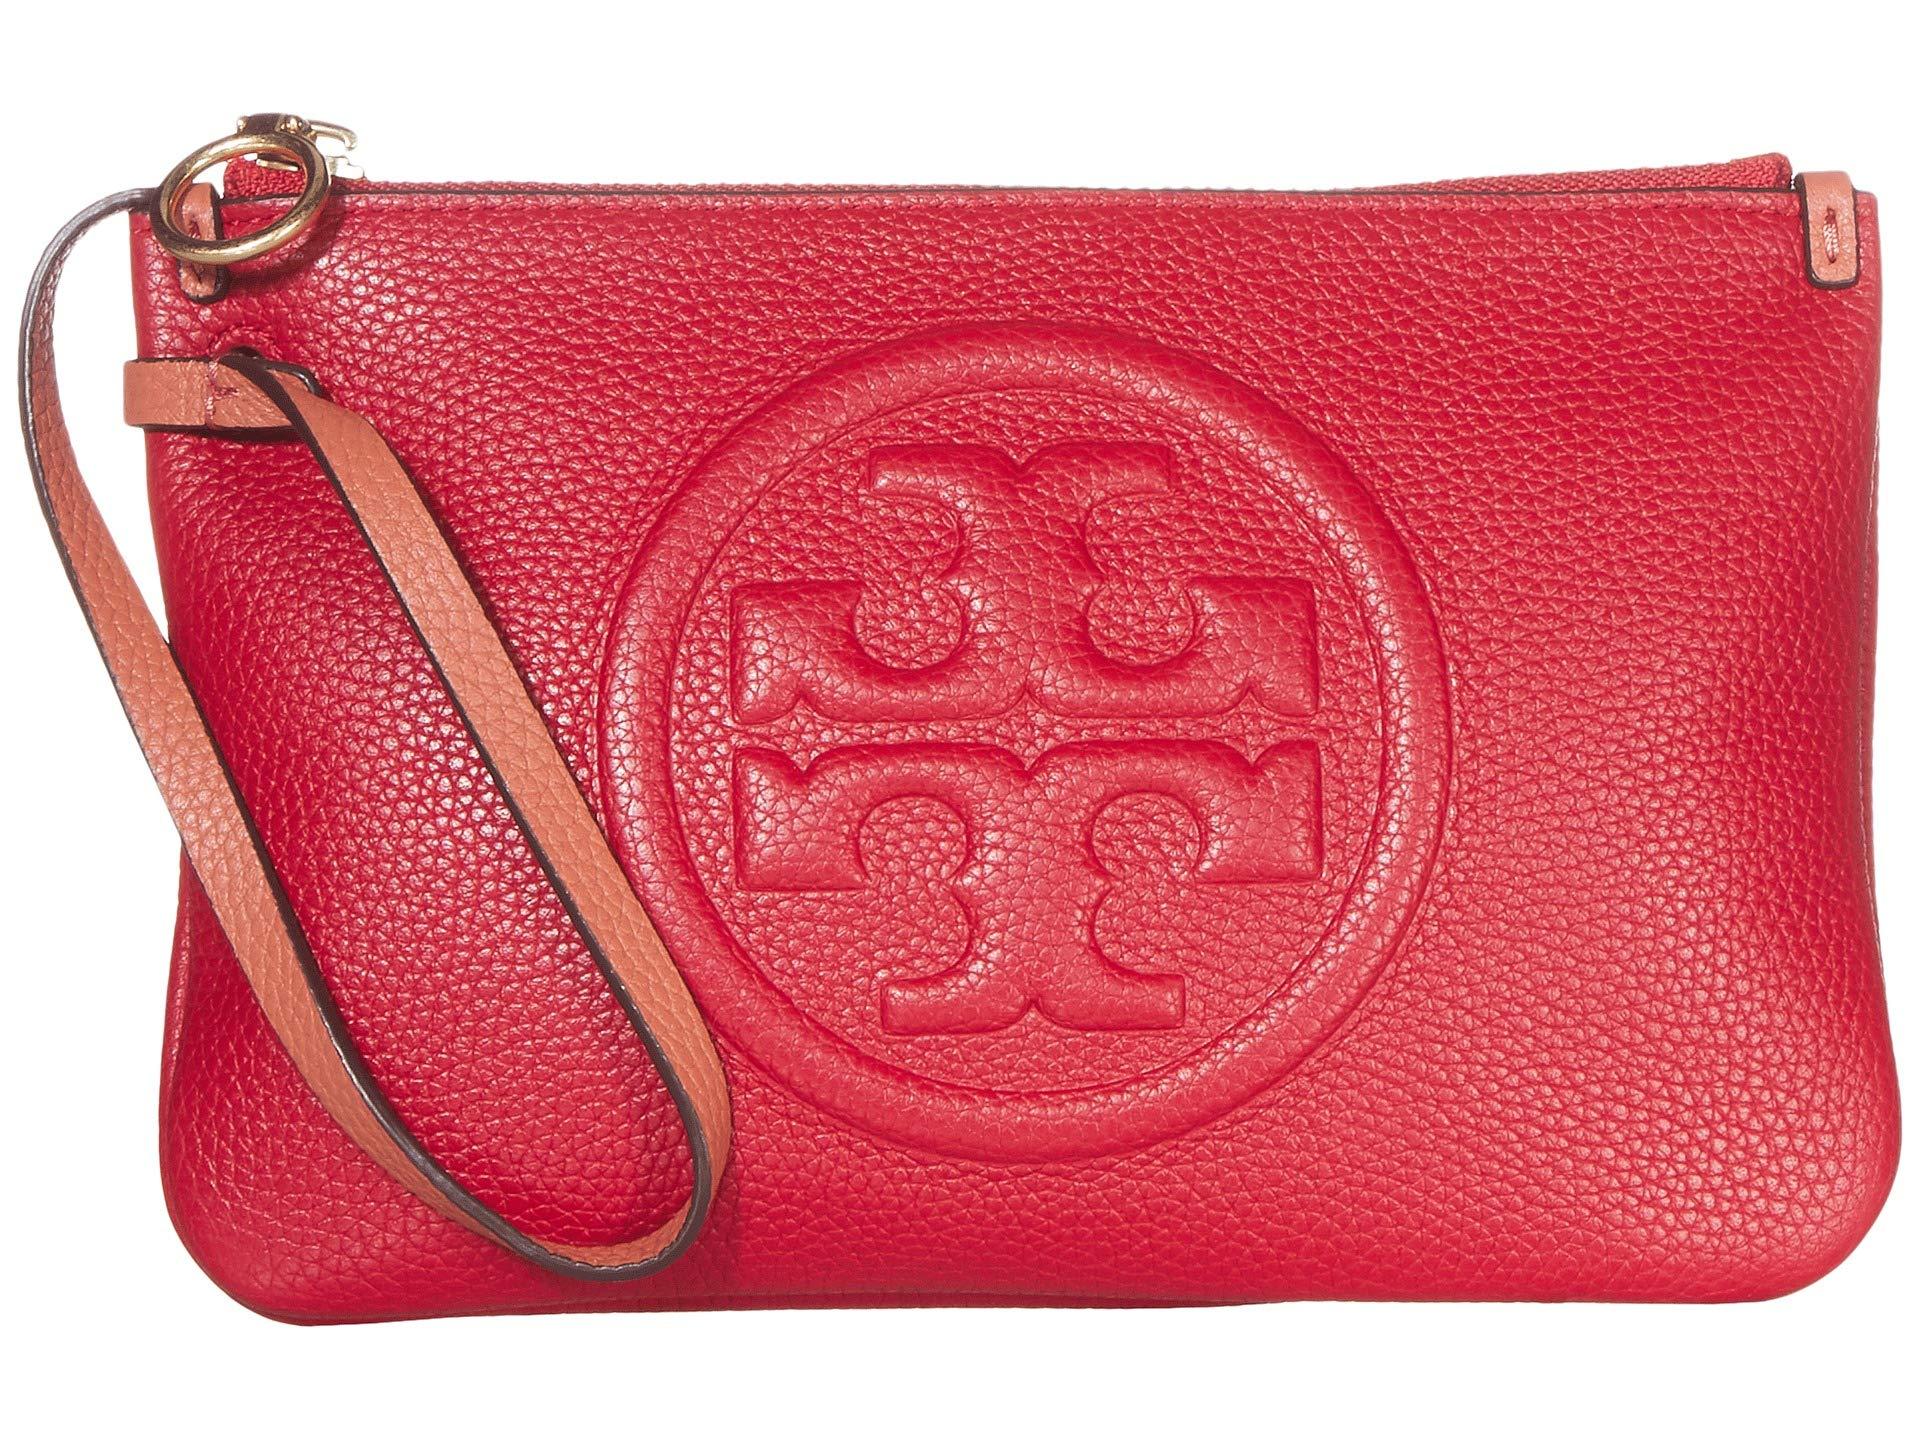 BANANANINA - Exquisitely gorgeous on red ✨ . Tory Burch Perry